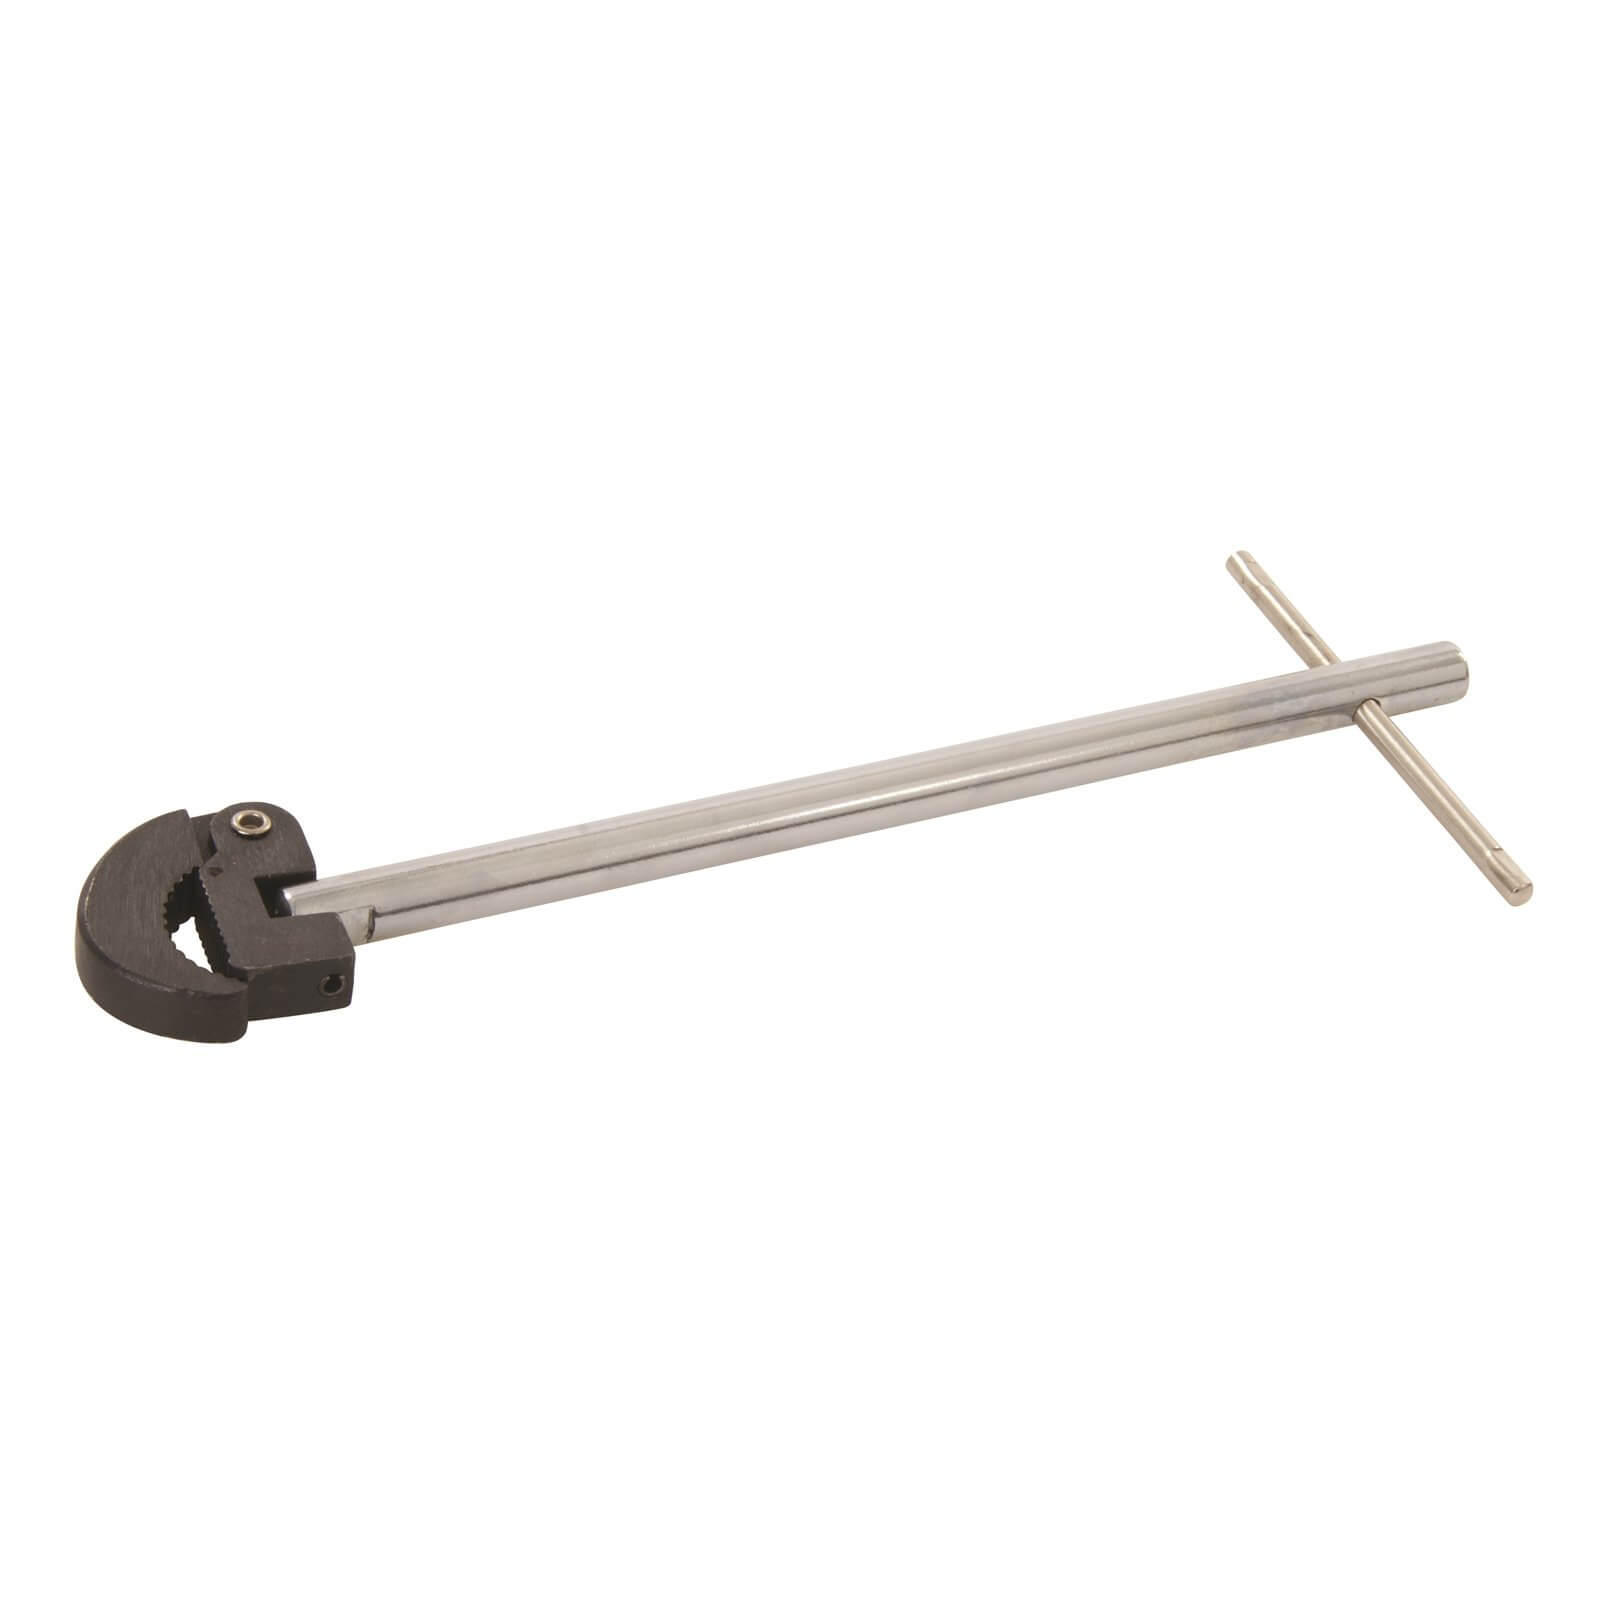 Photo of Silverline Adjustable Basin Wrench - 280mm